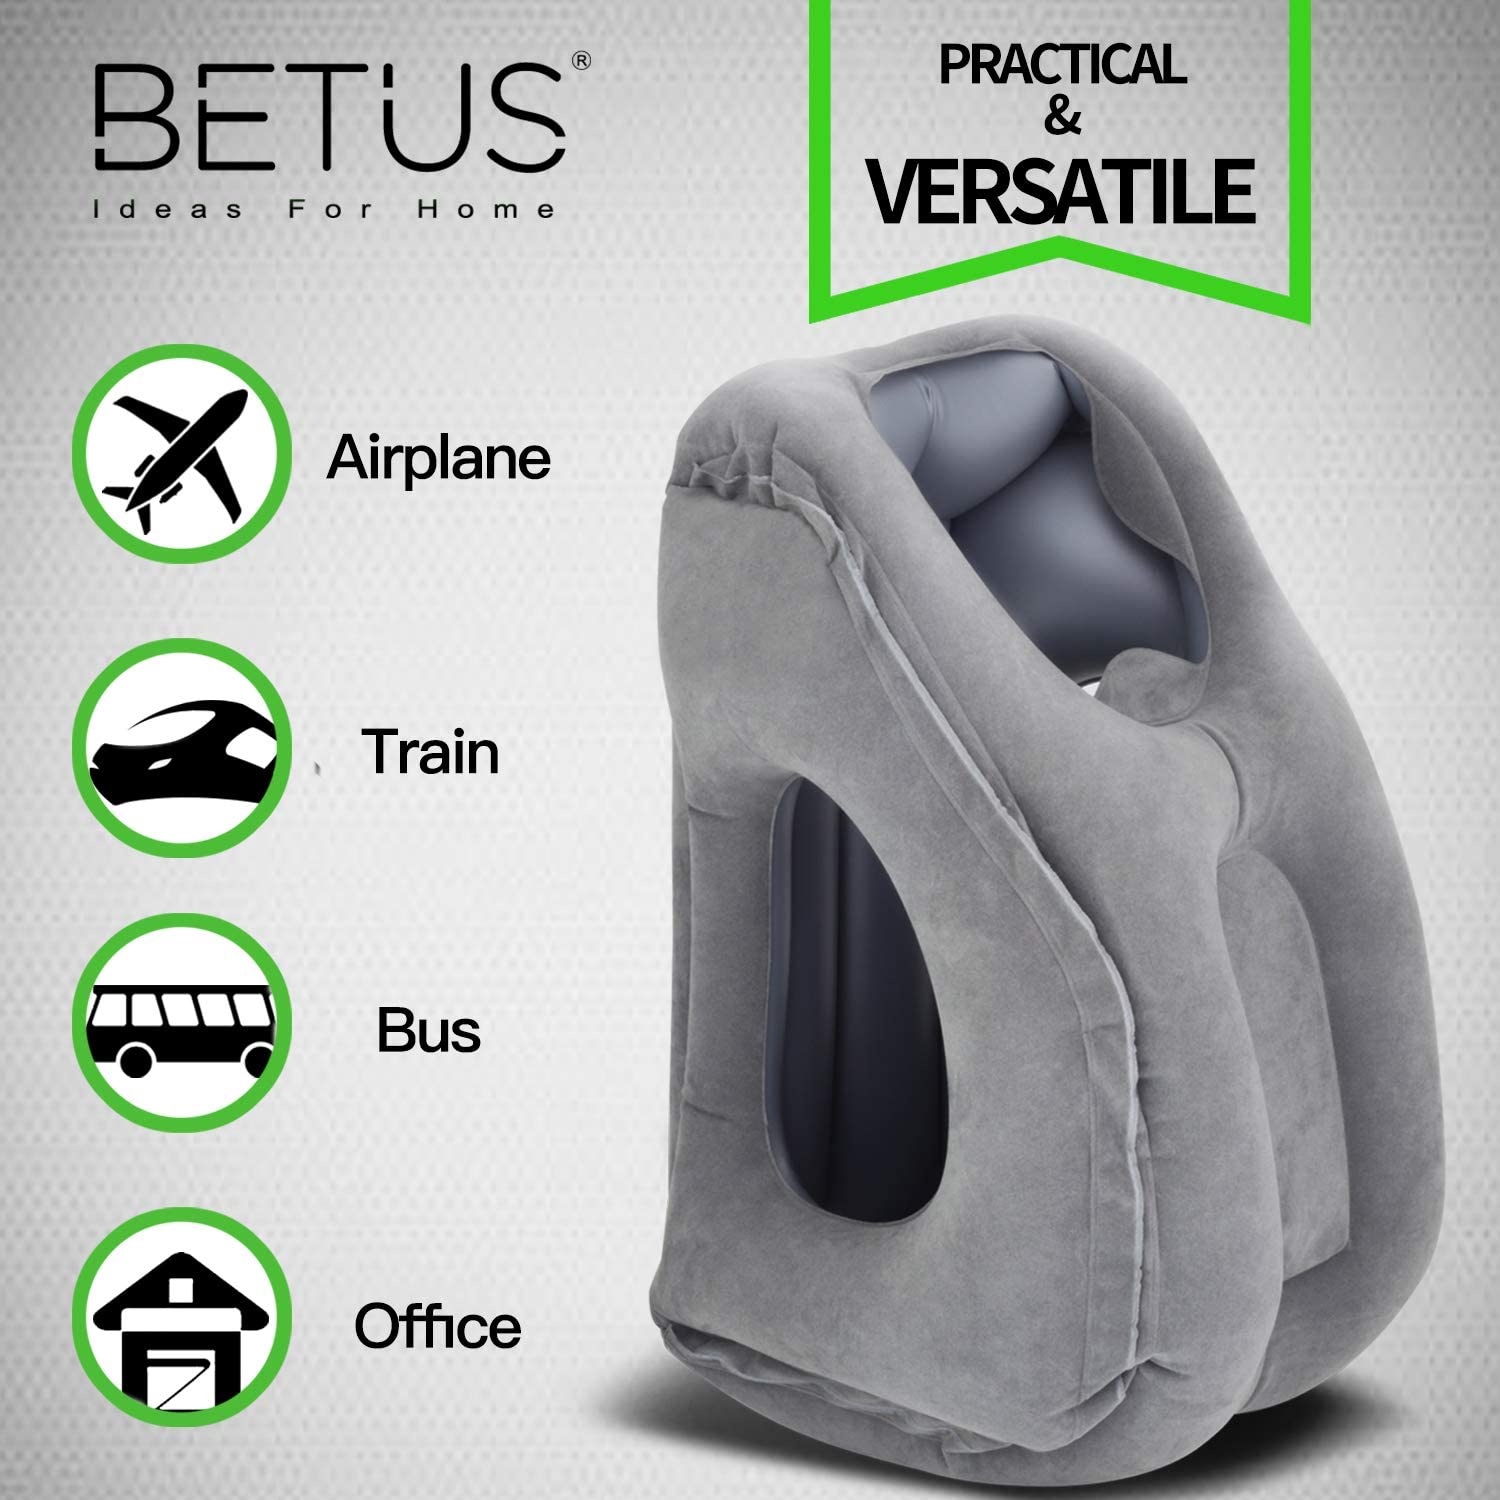 Betus Comfort Inflatable Travel Pillow for Airplane - Neck Head Rest Pillow - image 4 of 8